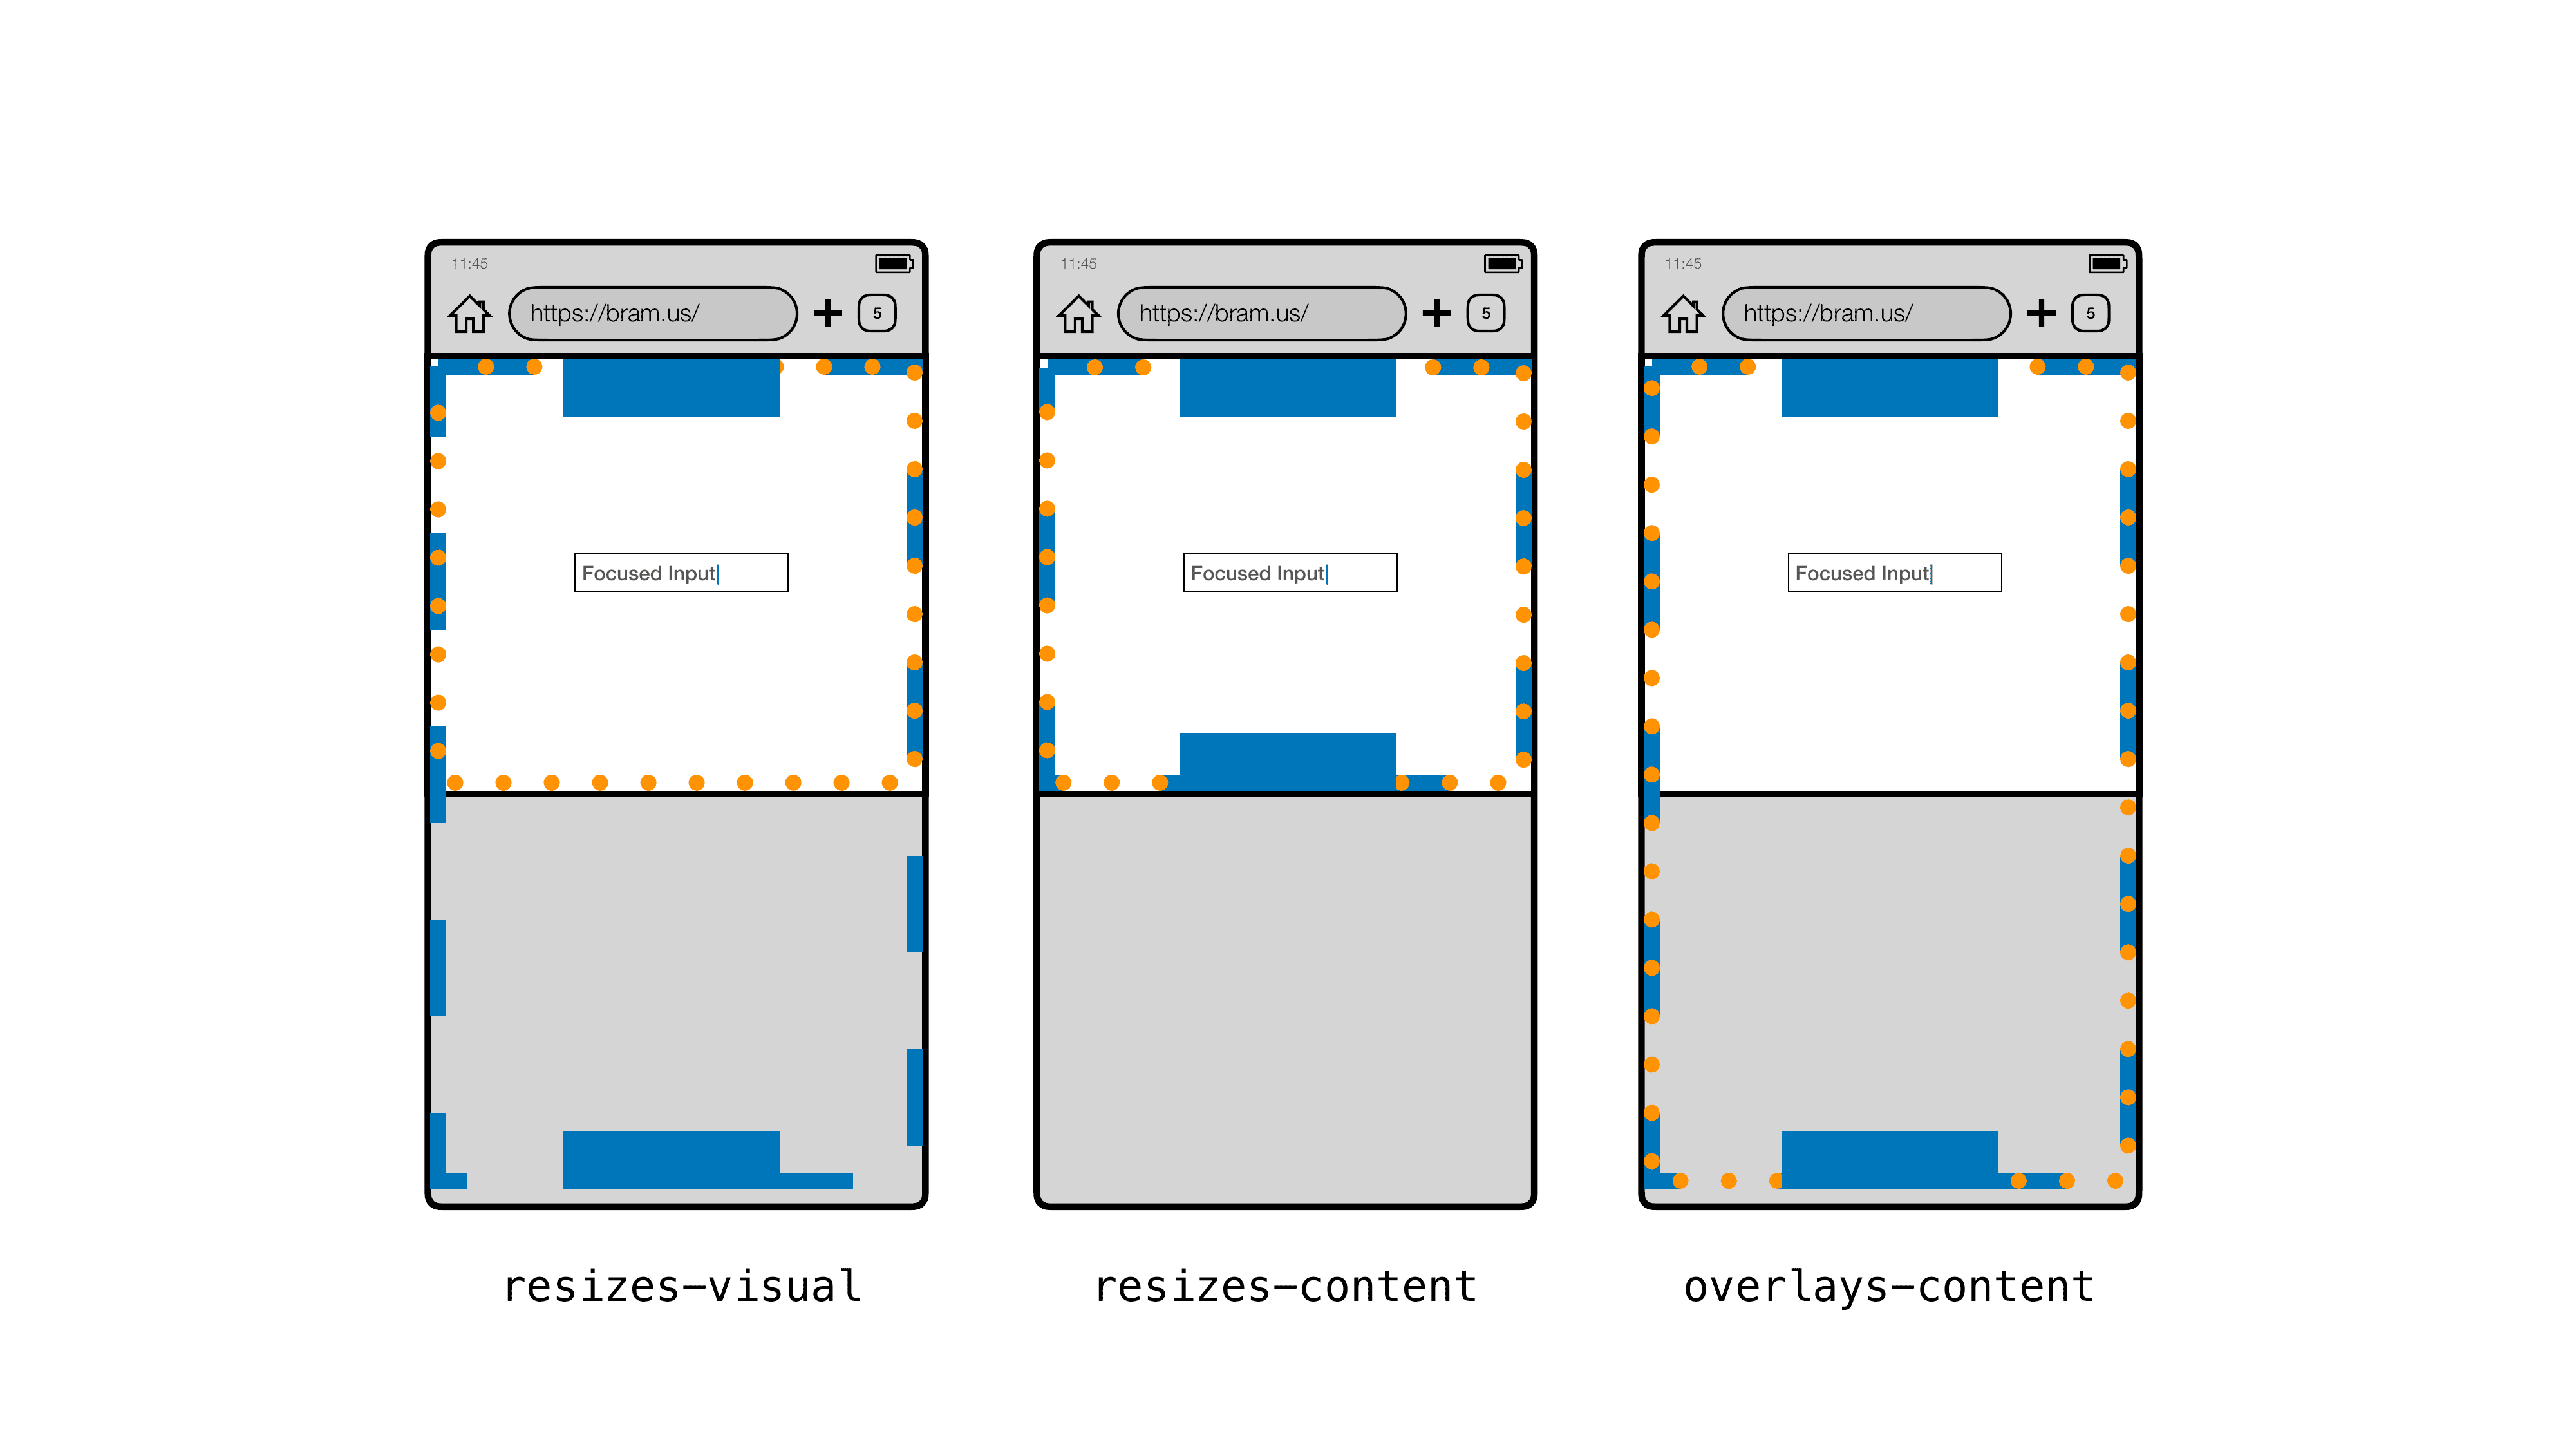 Visual comparison of all three values in Chrome 108 on Android. From left left to right: resizes-visual, resizes-content, and overlays-content.